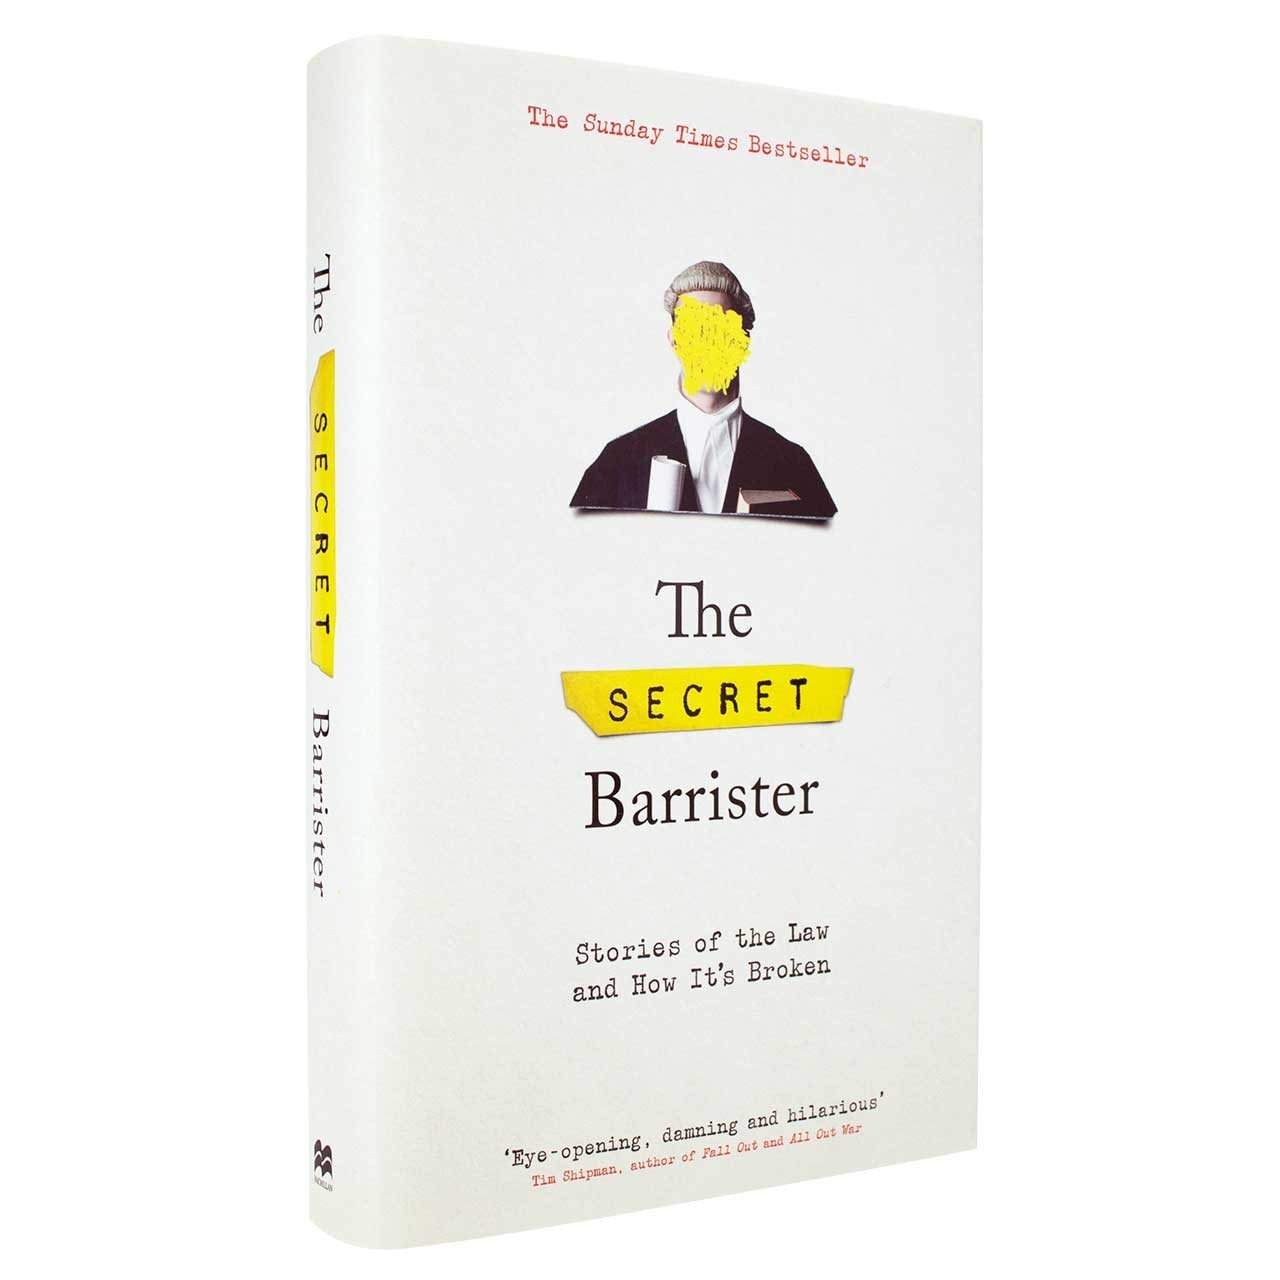 author of the secret barrister